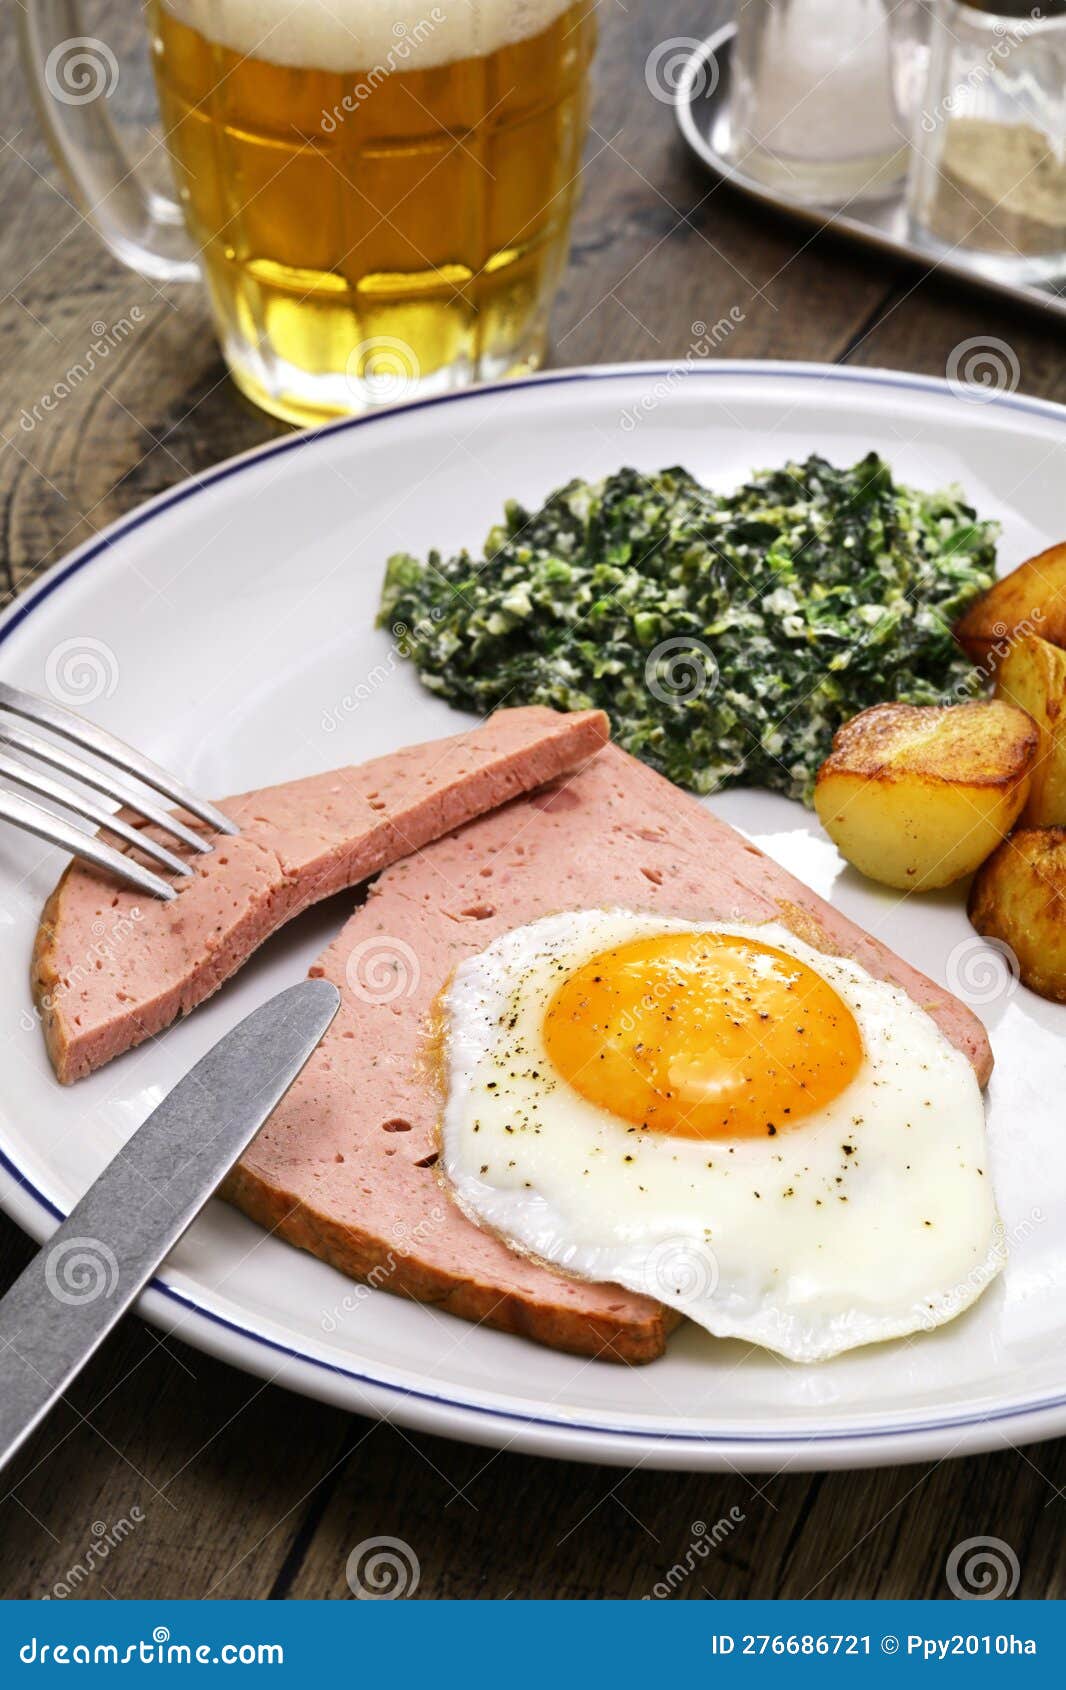 leberkÃ¤se with spinach, potatoes and fried egg